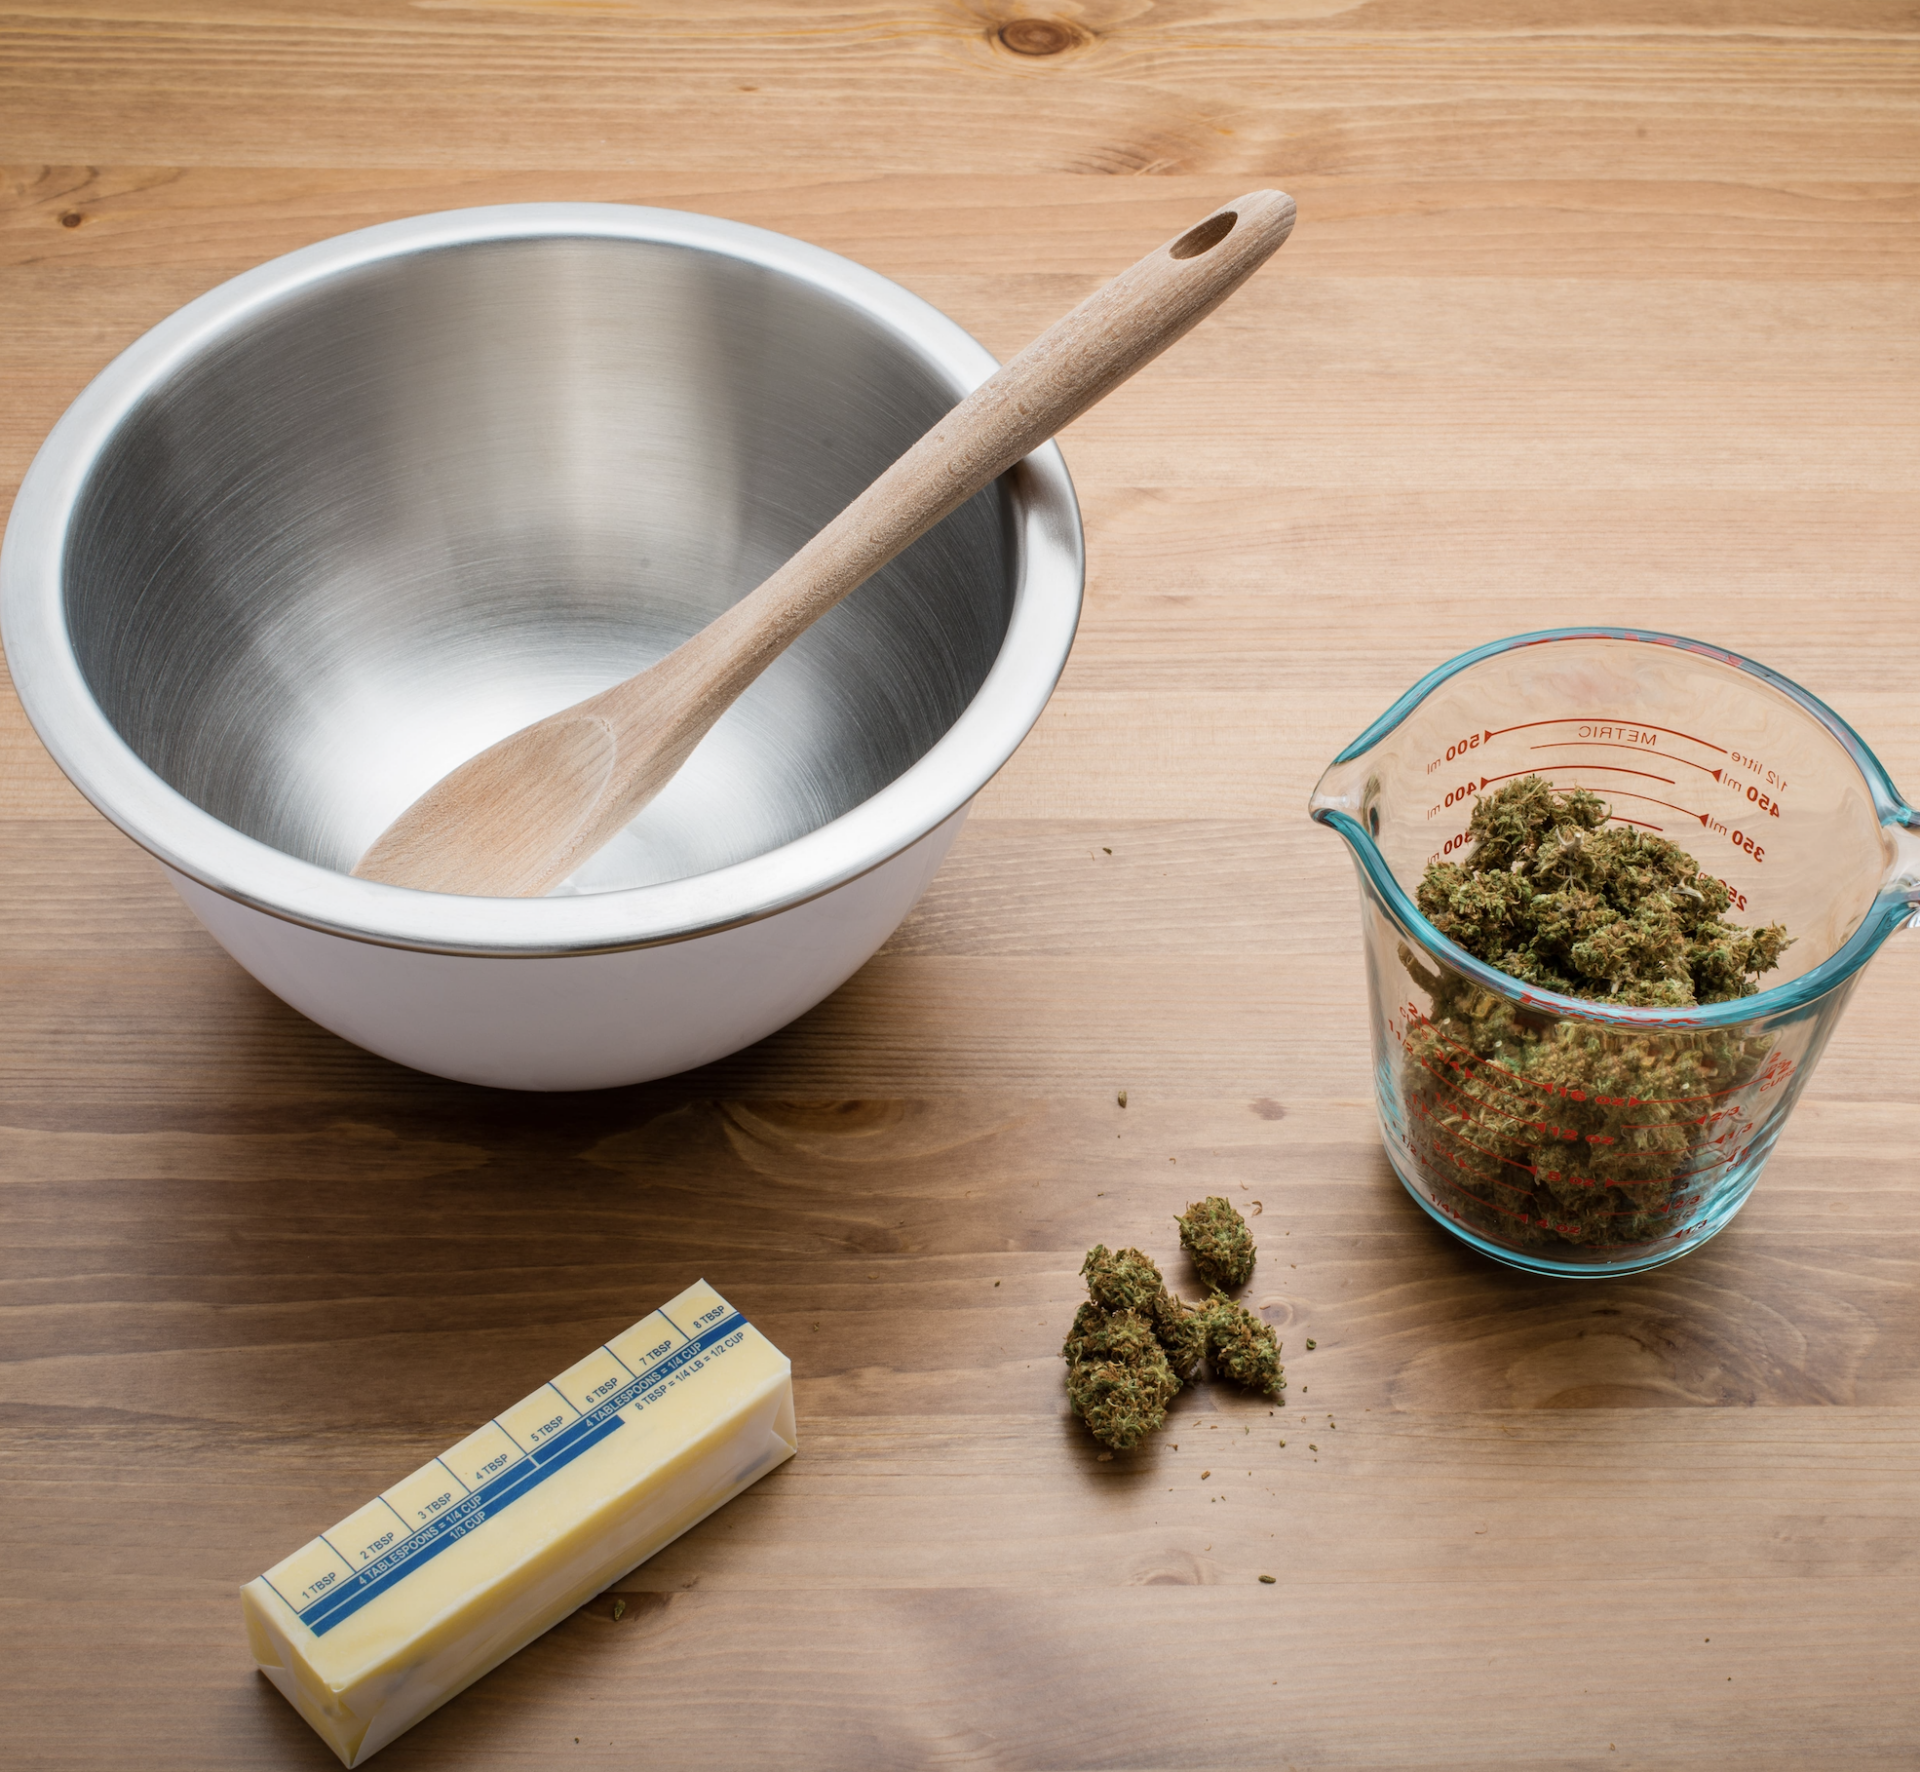 Making cannabutter with decarbed marijuana